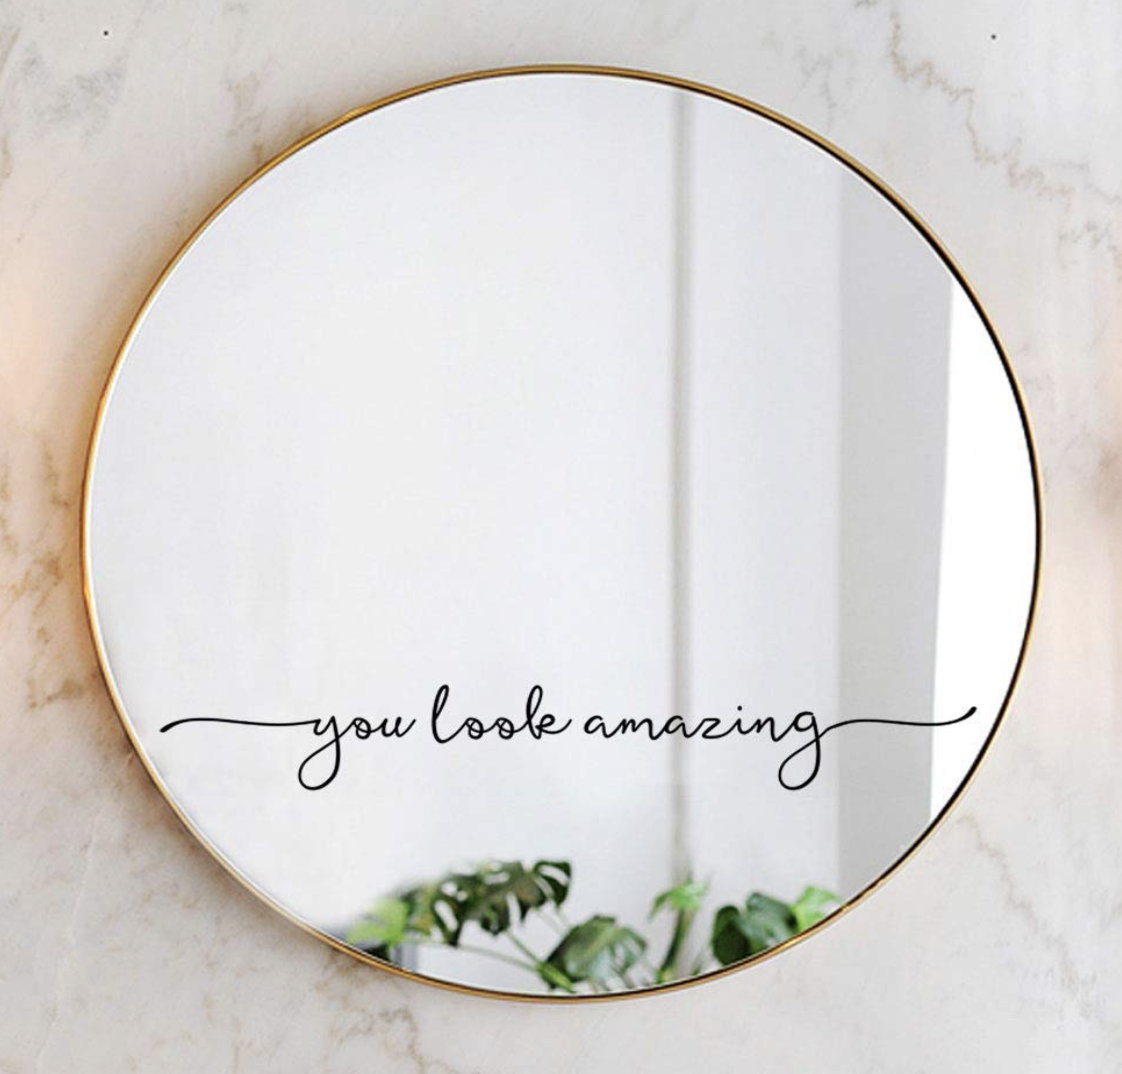 the decal that says &quot;you look amazing&quot; on a circular mirror